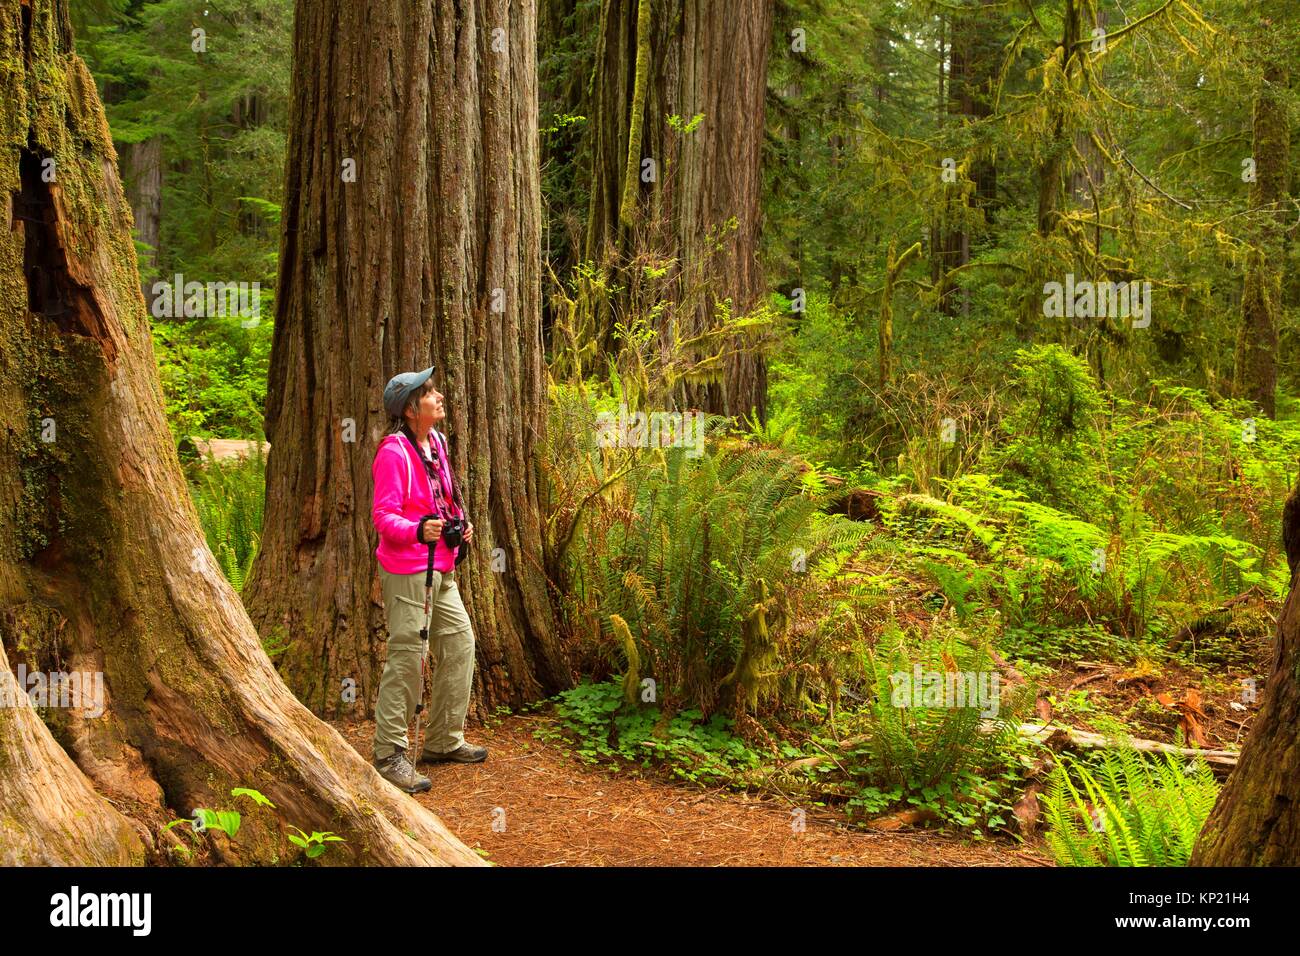 Hiker in Coast redwood (Sequoia sempervirens) forest along Simpson-Reed Discovery Trail, Jedediah Smith Redwoods State Park, Redwood National Park, Stock Photo